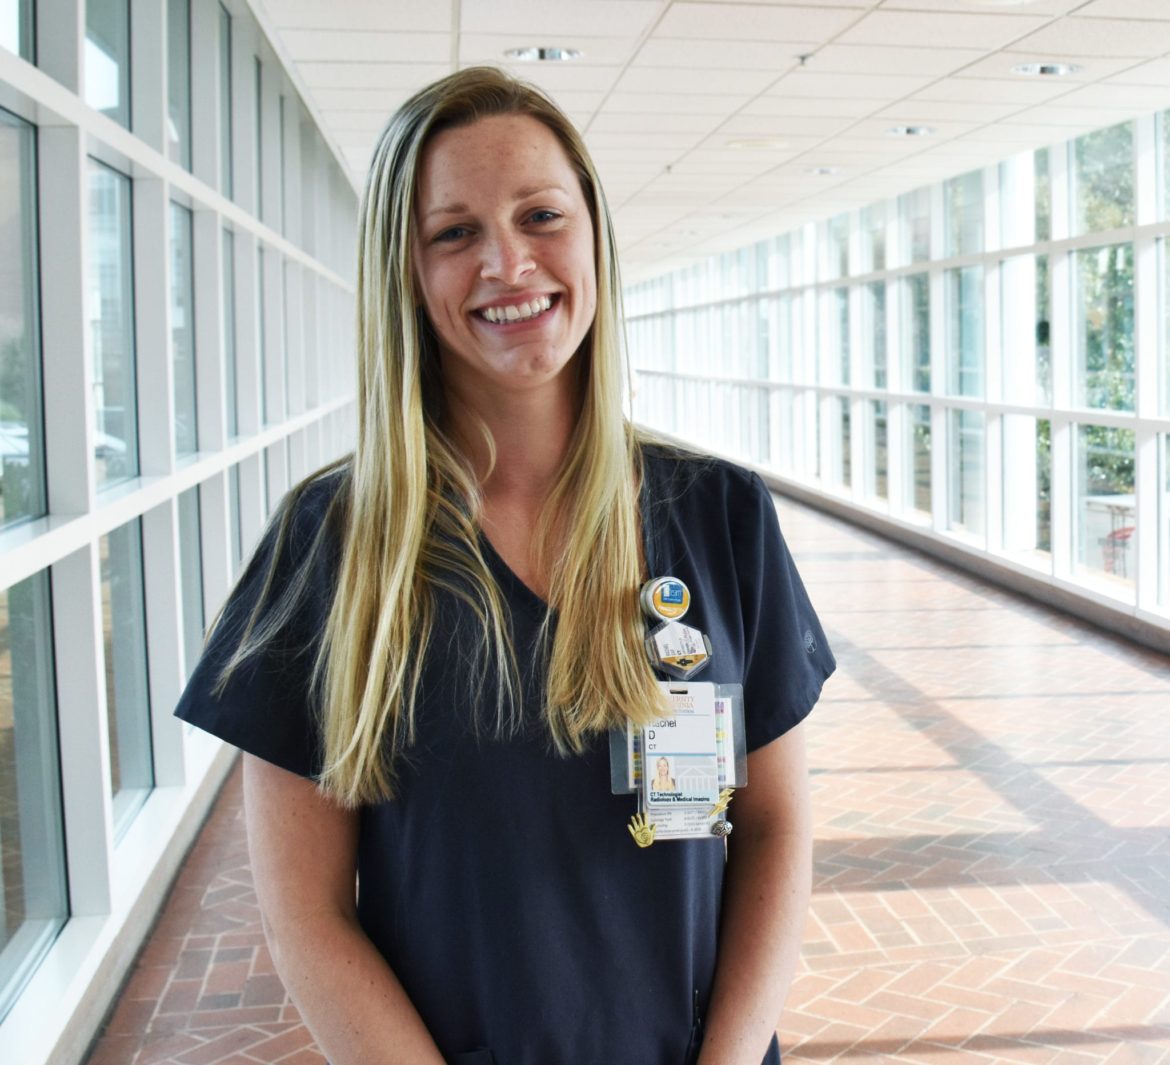 Woman CT technologist, Rachel Day, stands in a well lit hallway and smiles at the camera